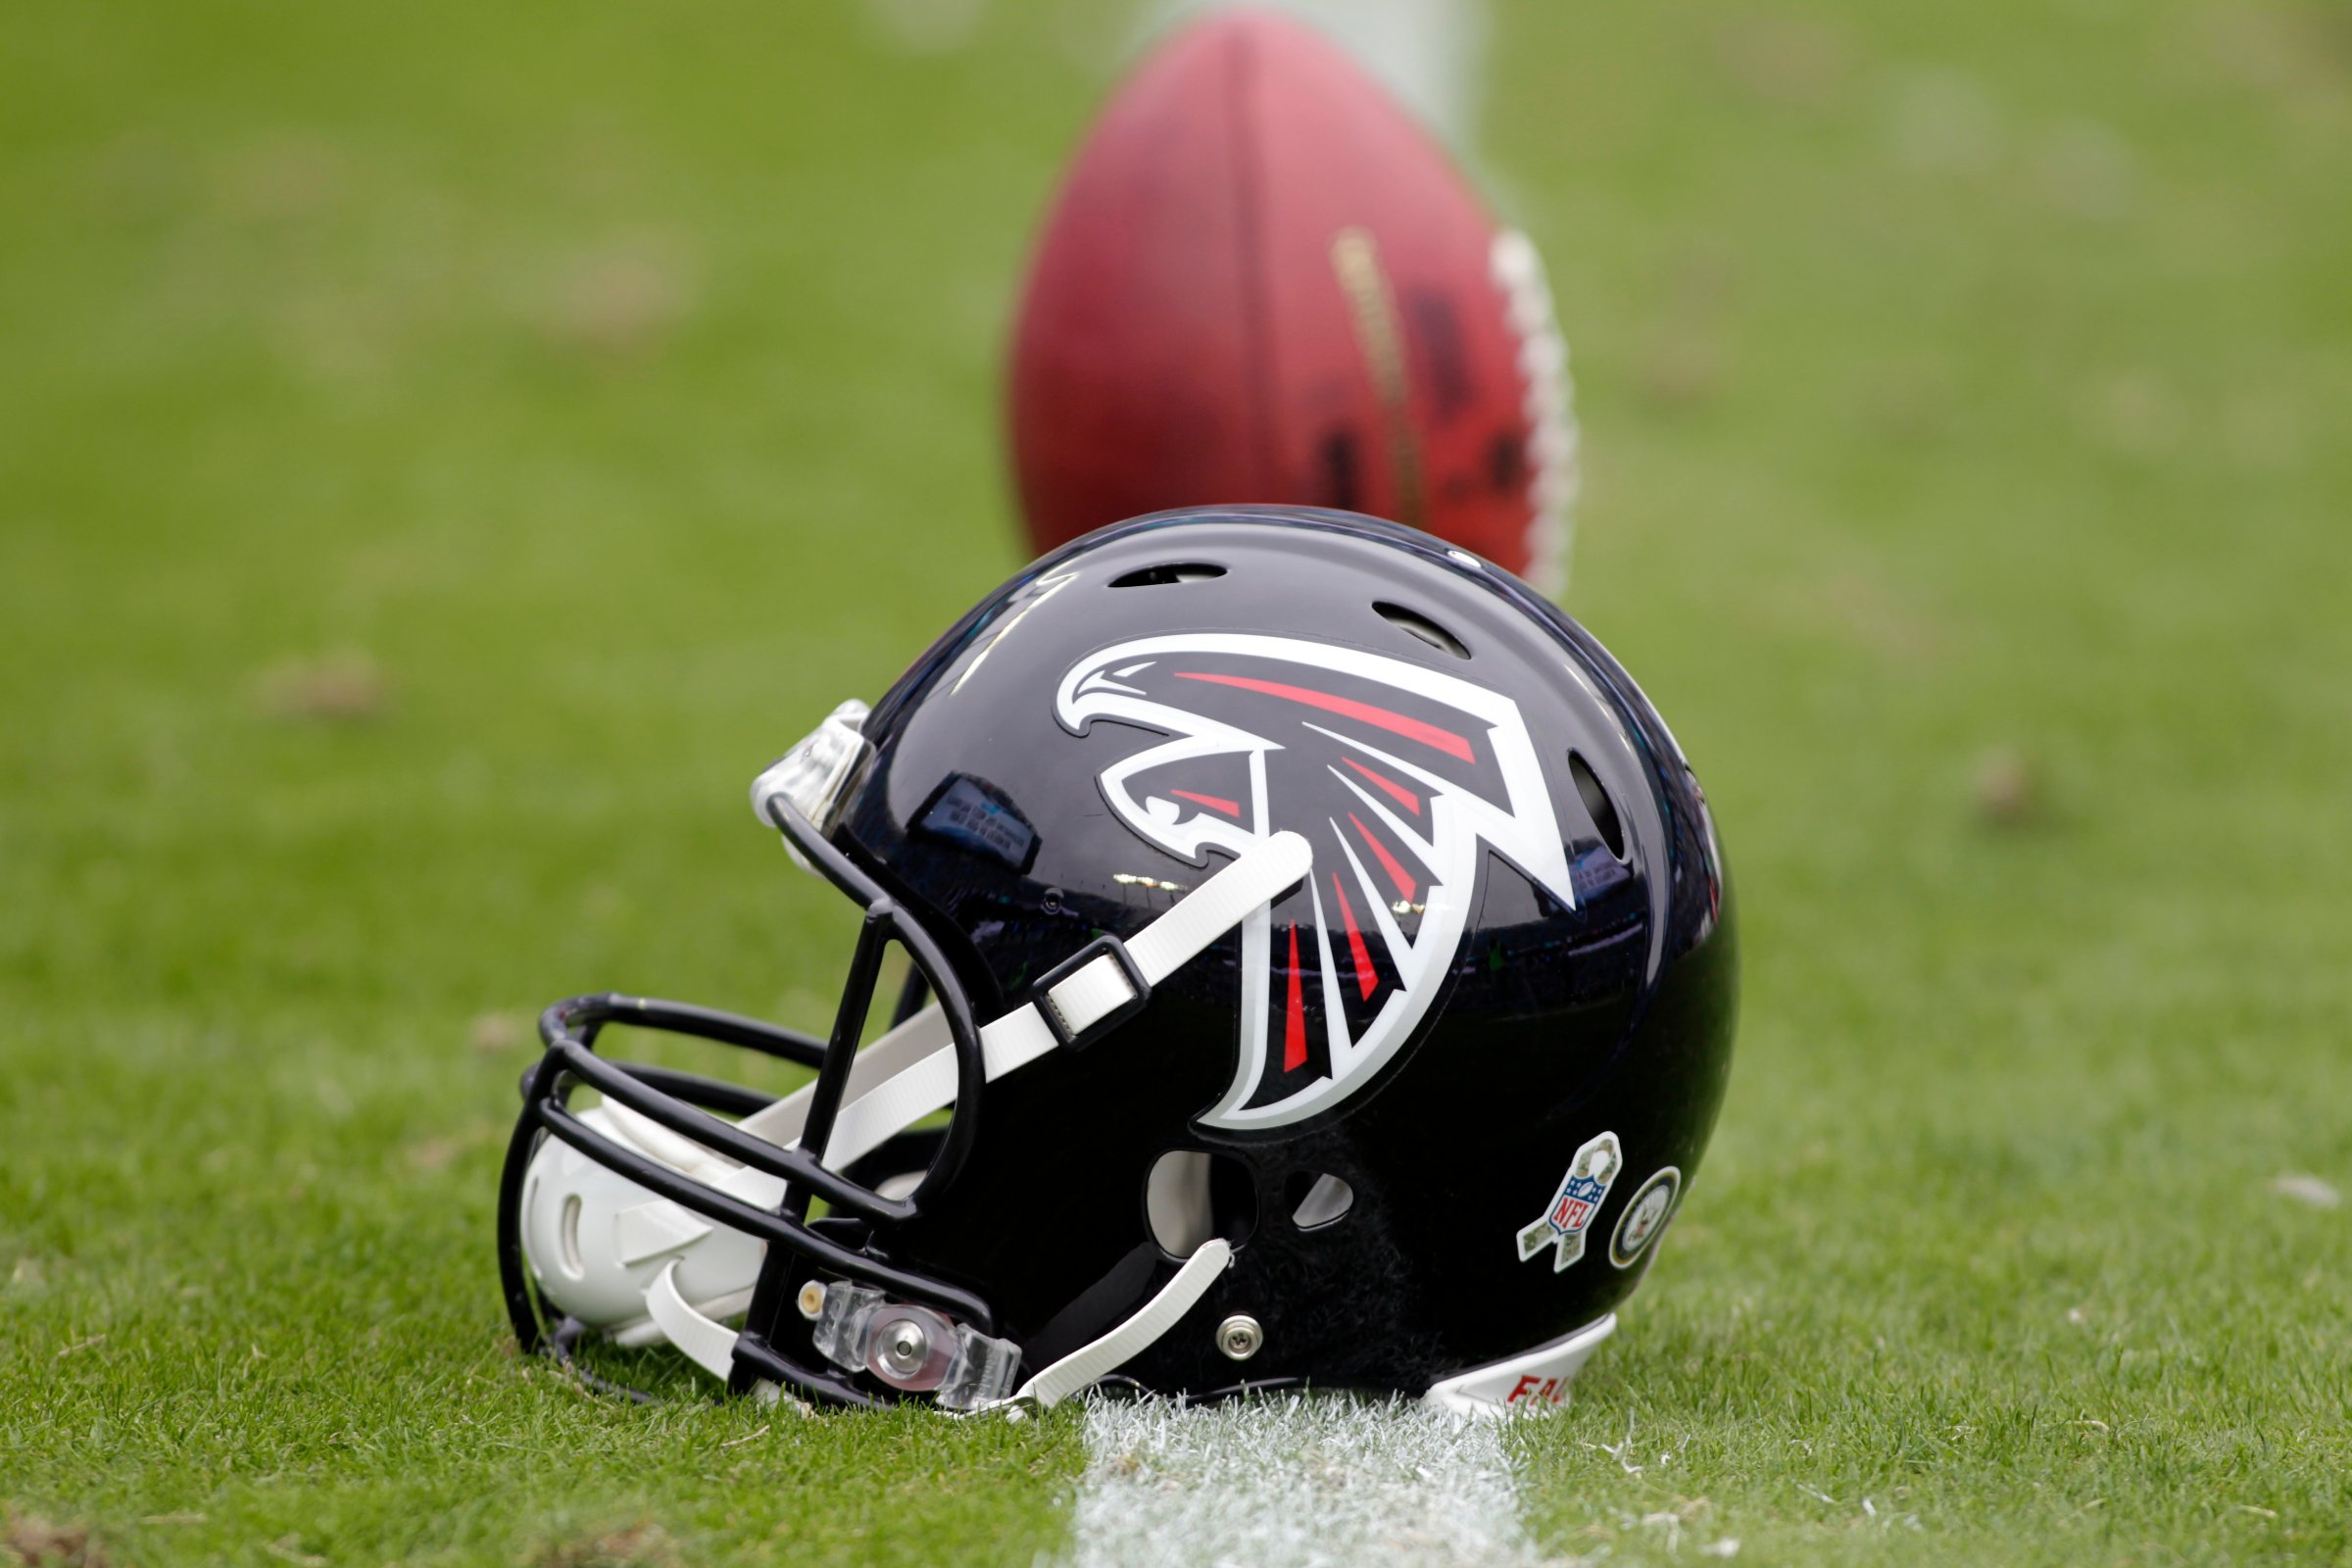 An Atlanta Falcons' helmet sits on the turf before a game against the Carolina Panthers in Charlotte, N.C. on Nov. 16, 2014.